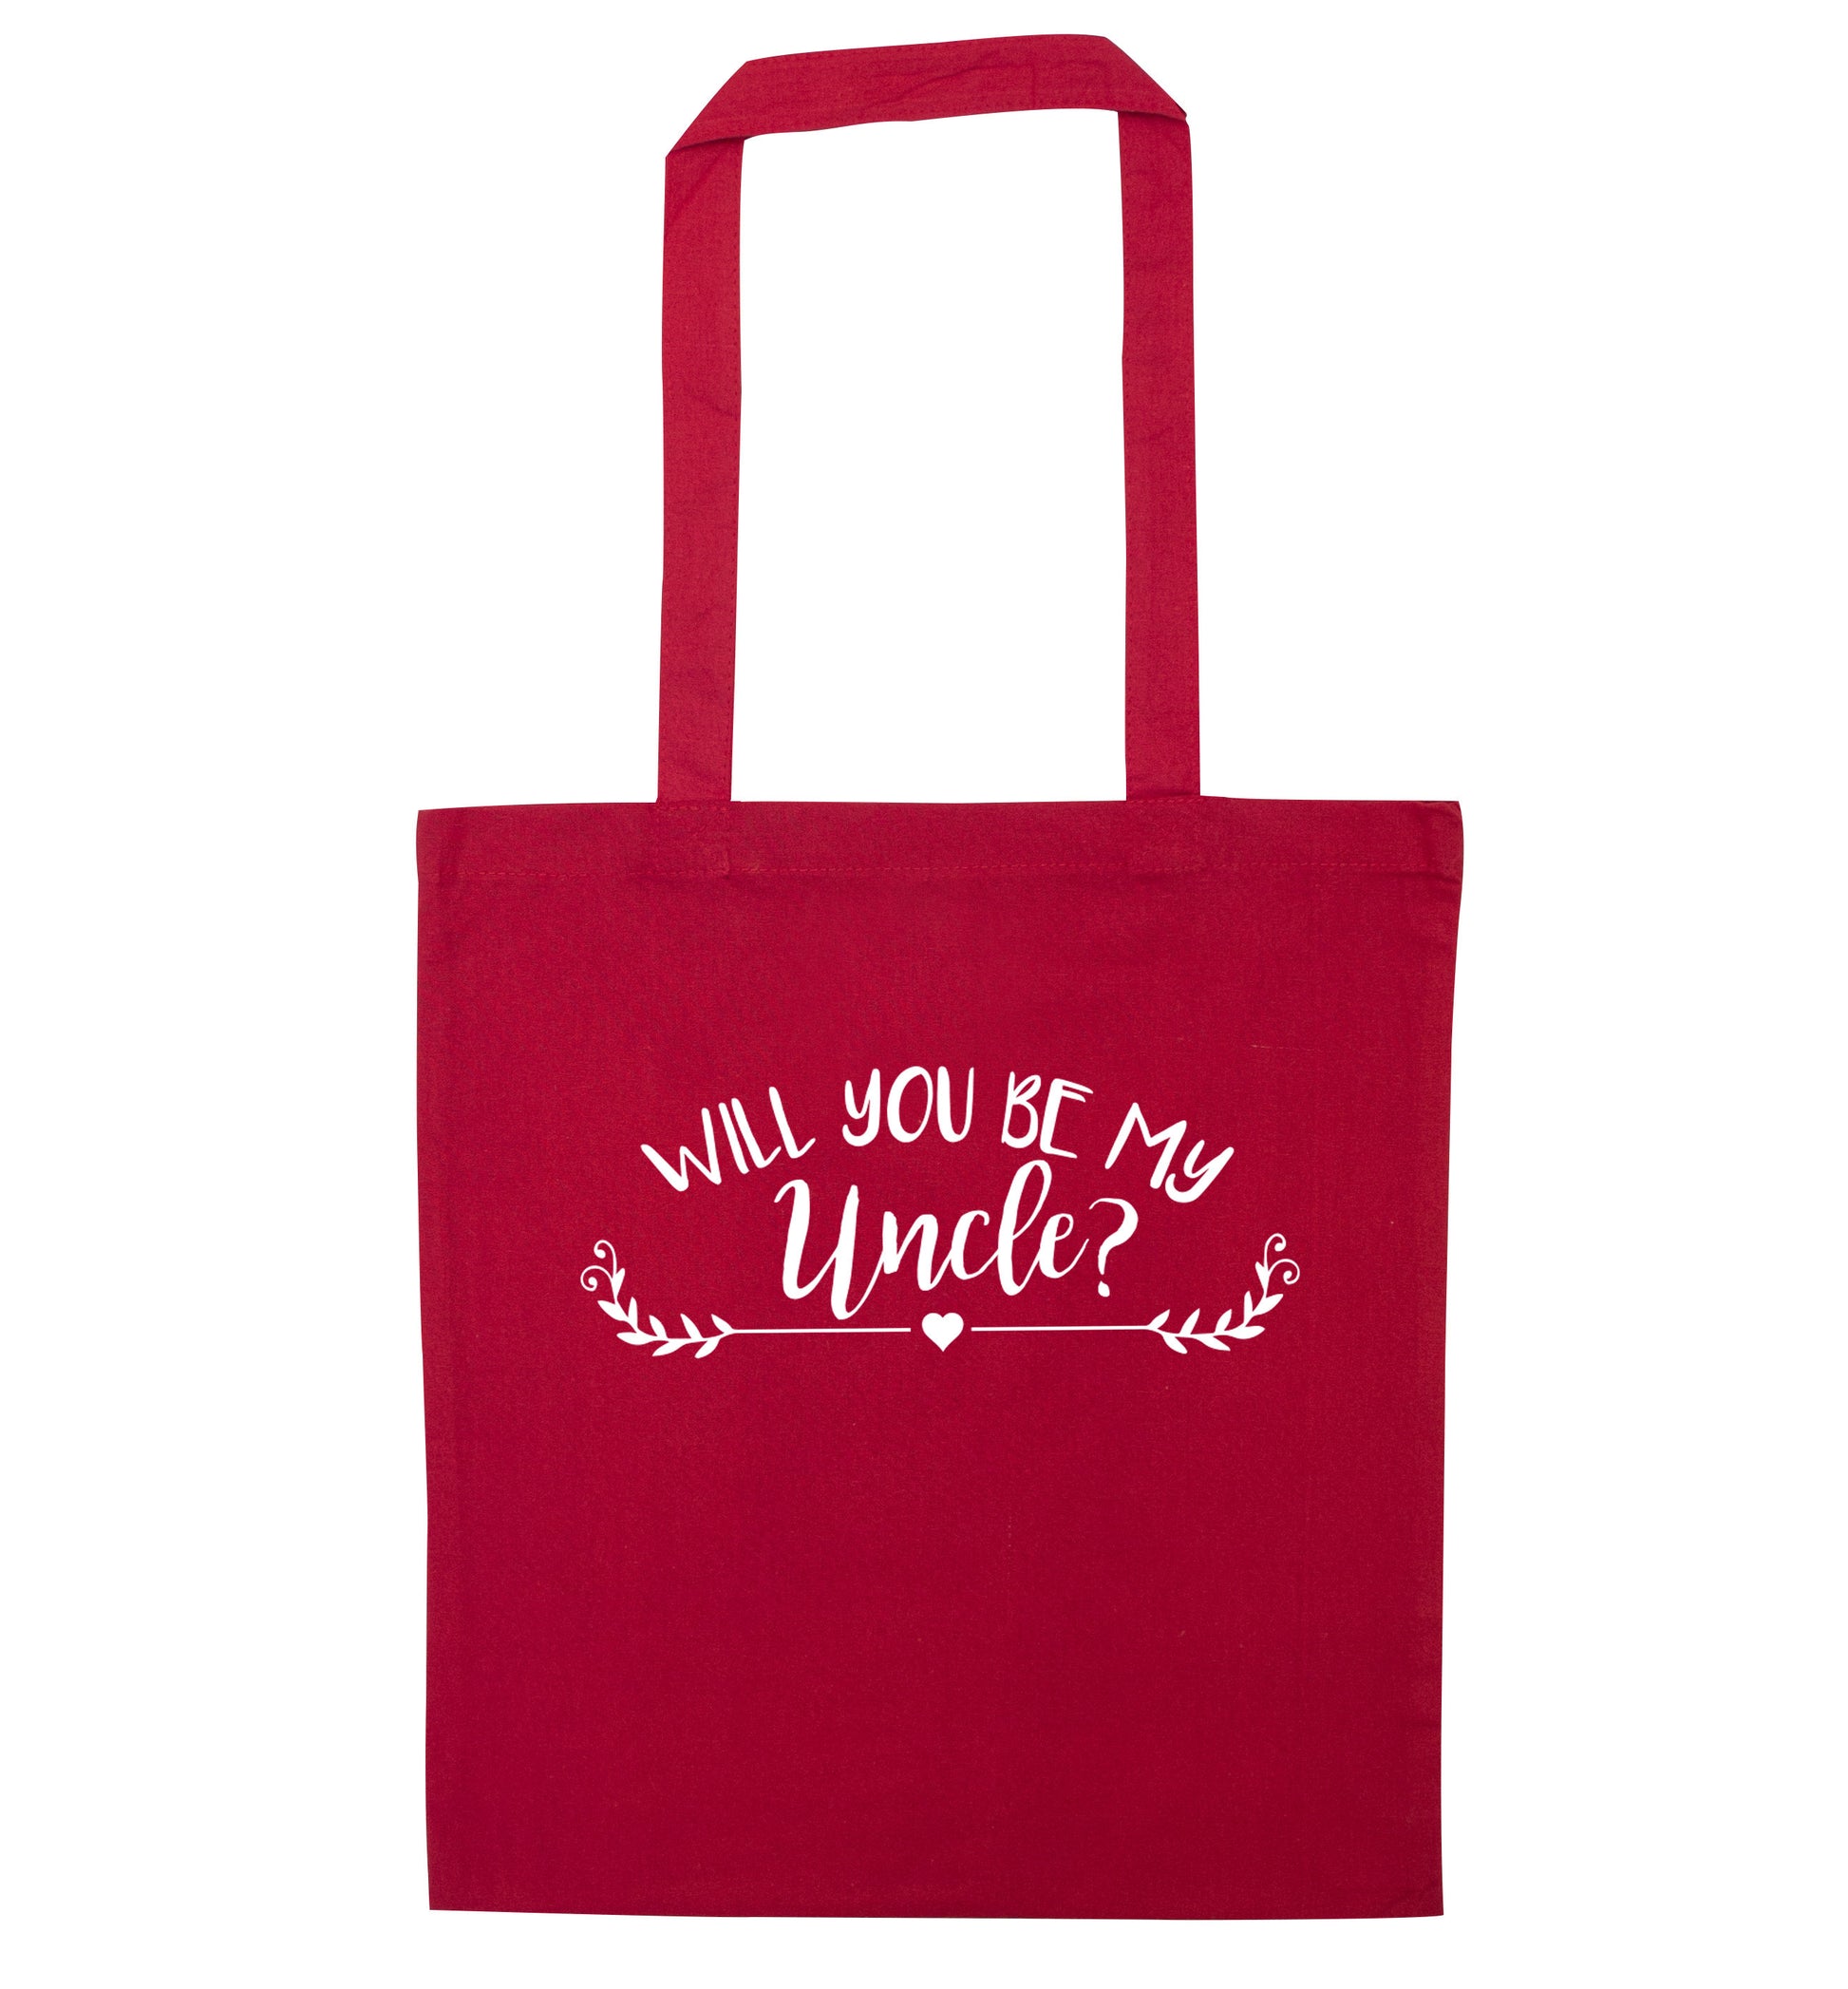 Will you be my uncle? red tote bag